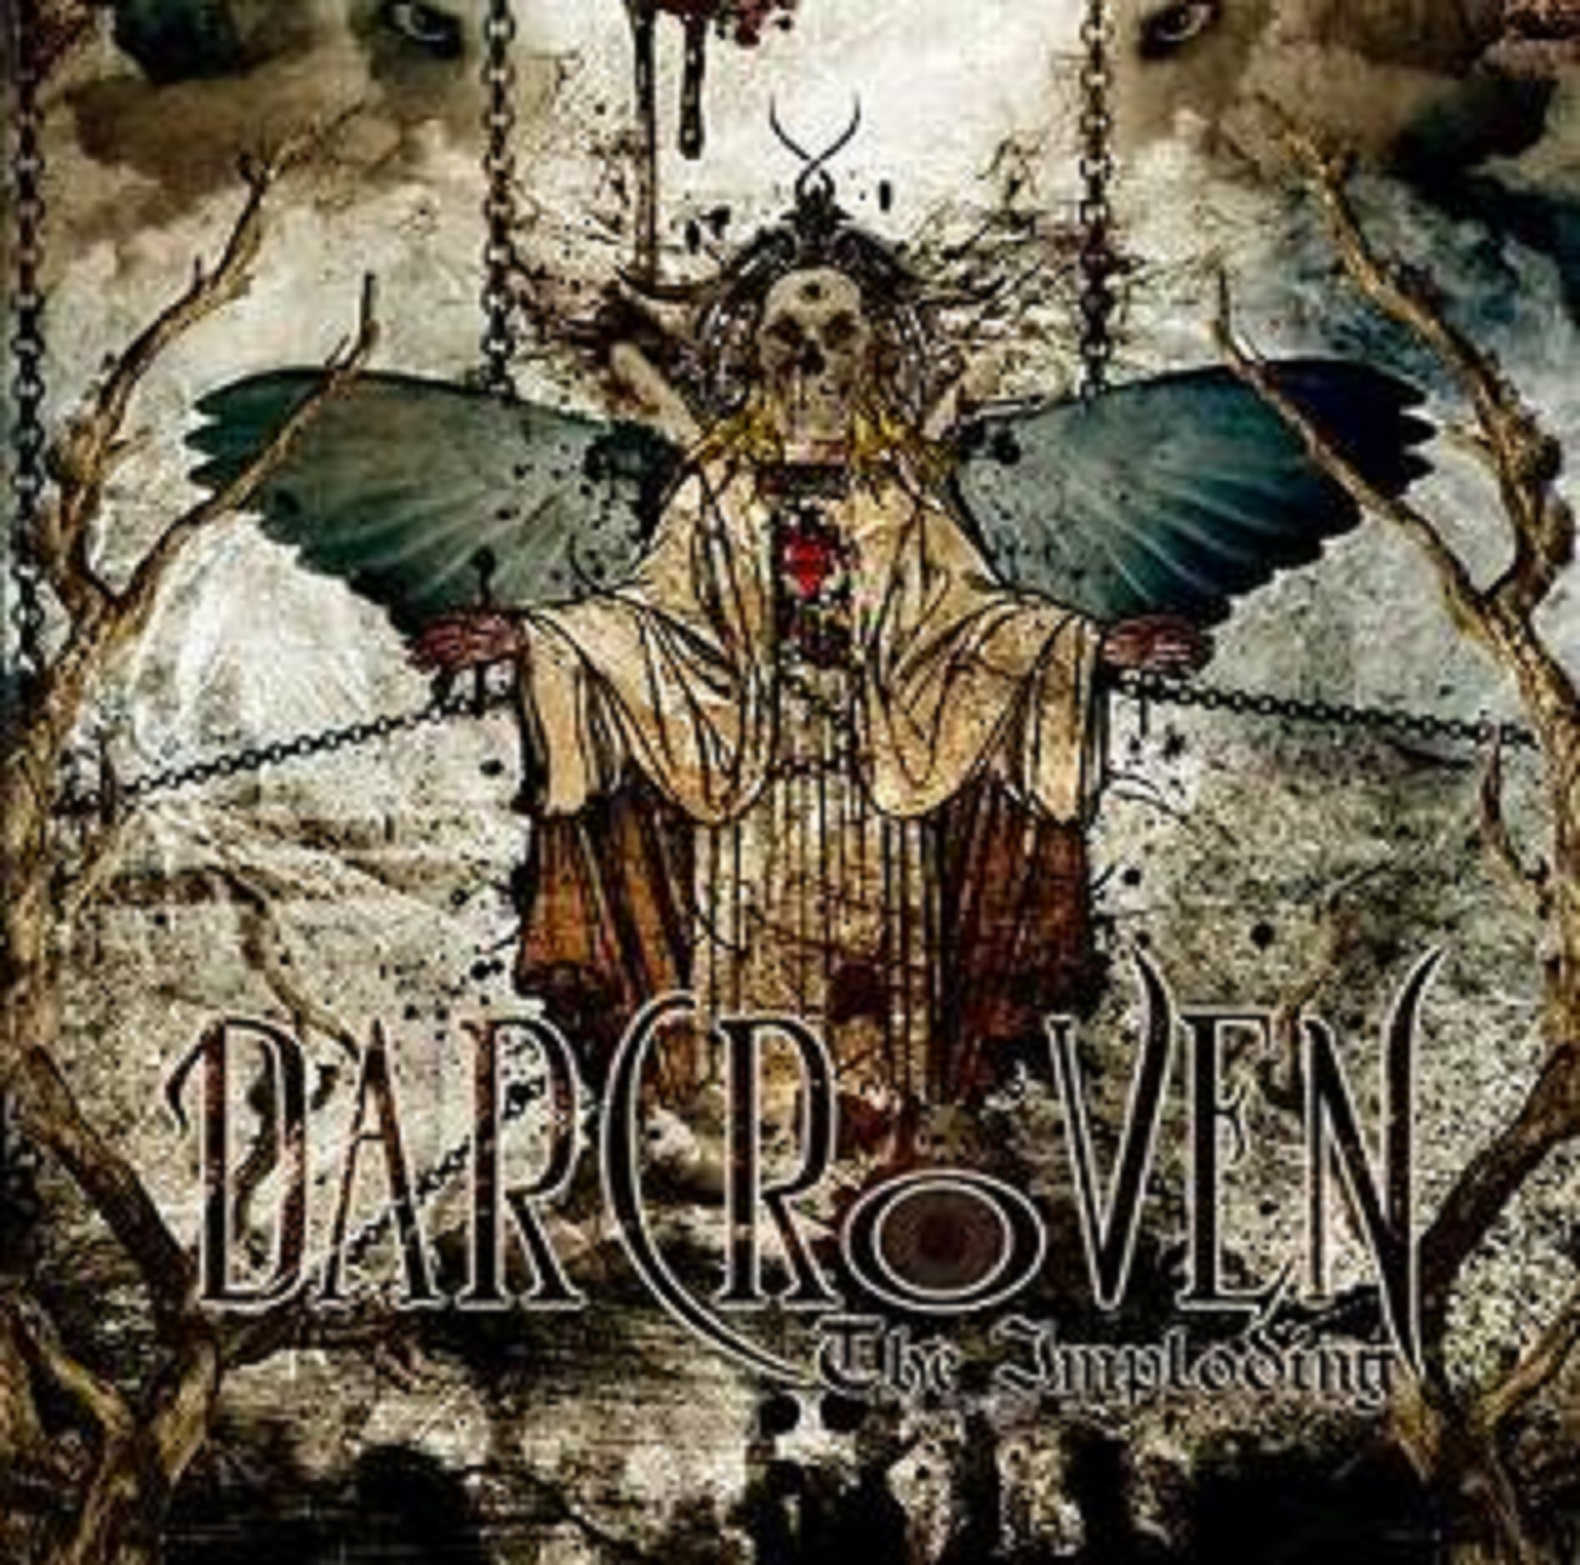 Darcroven - The Imploding (2011)